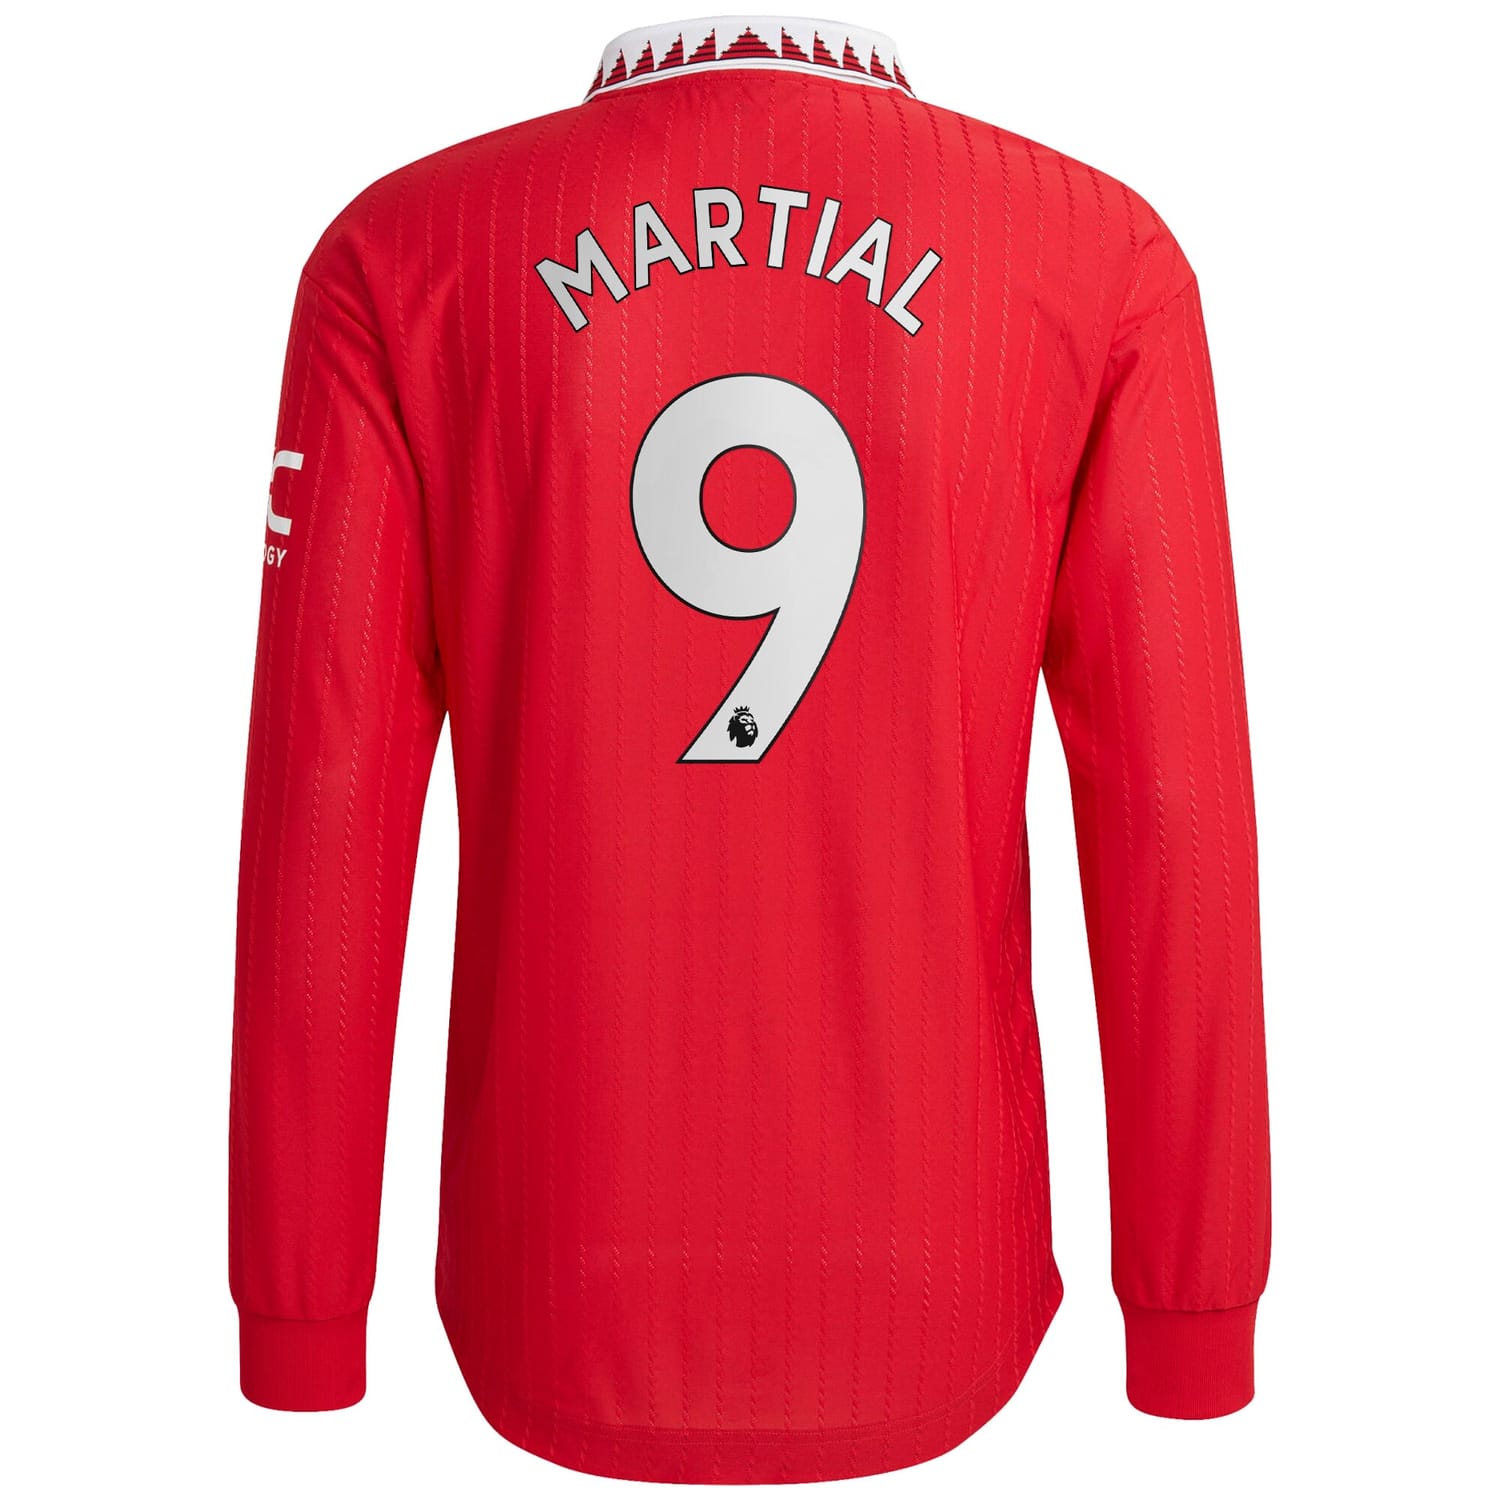 Premier League Manchester United Home Authentic Jersey Shirt Long Sleeve 2022-23 player Anthony Martial 9 printing for Men